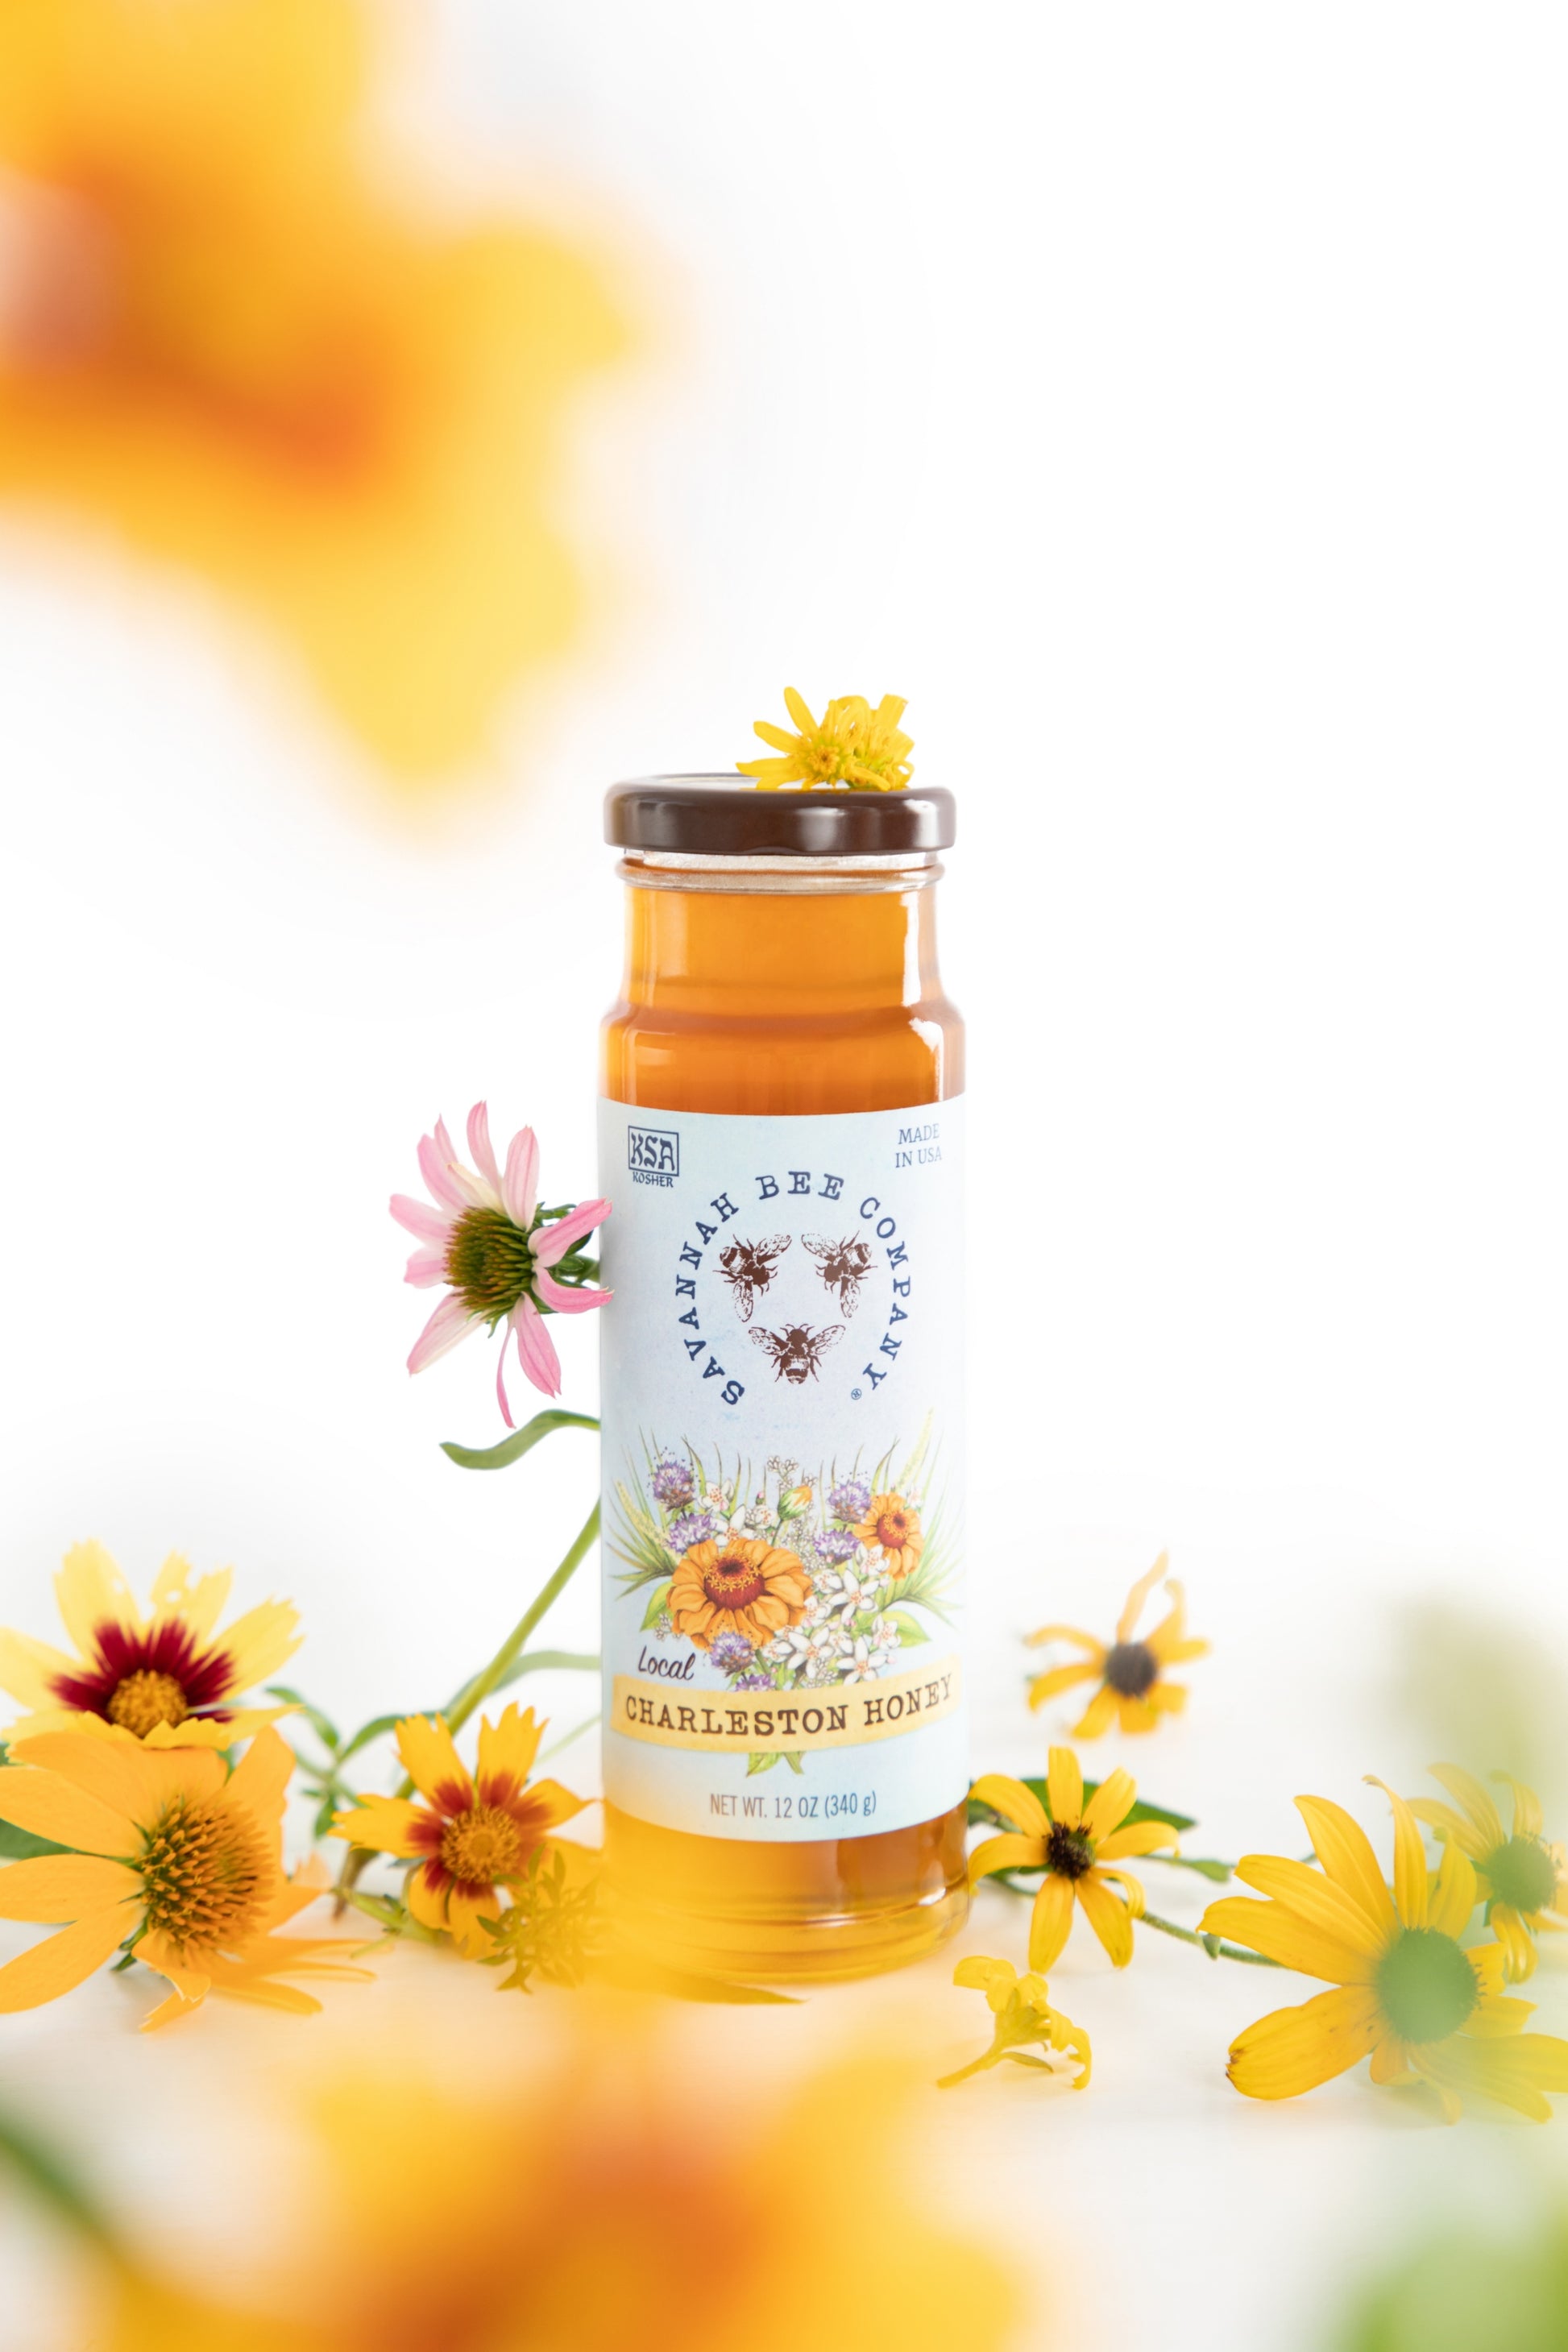 12 ounce Charleston honey surrounded by wildflowers.